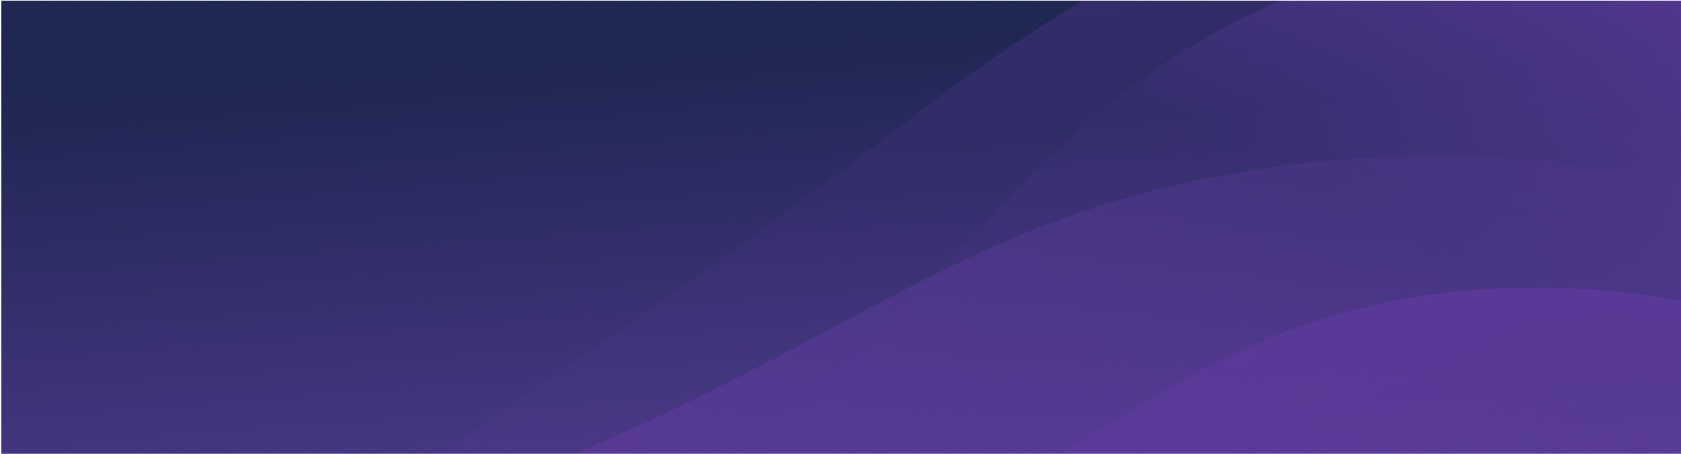 cta-banner_contained_purple